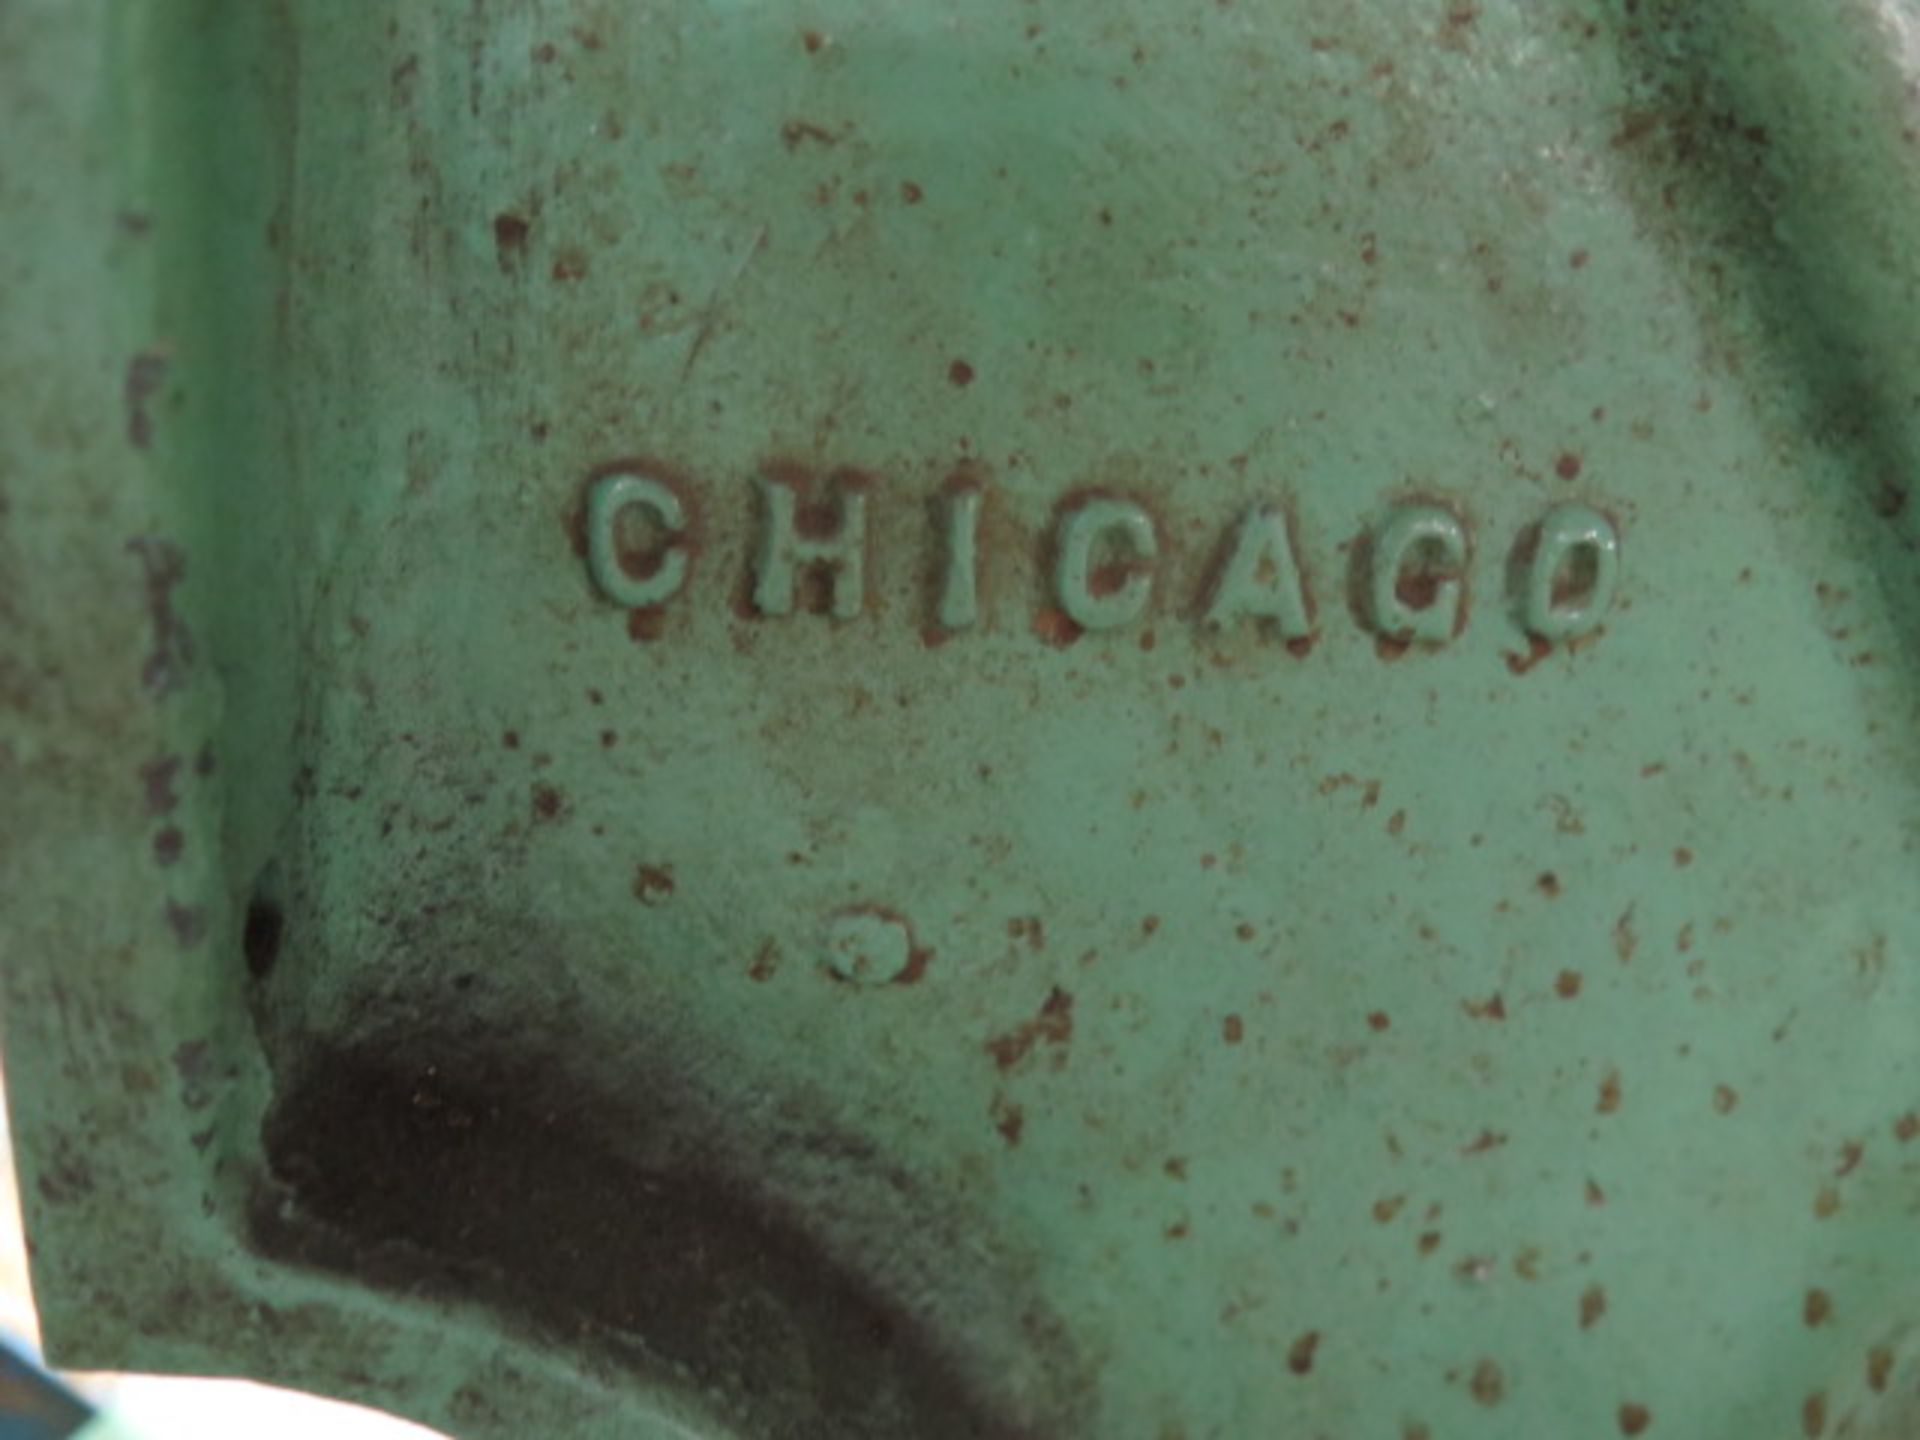 Chicago Pneumatic Press - Image 3 of 3